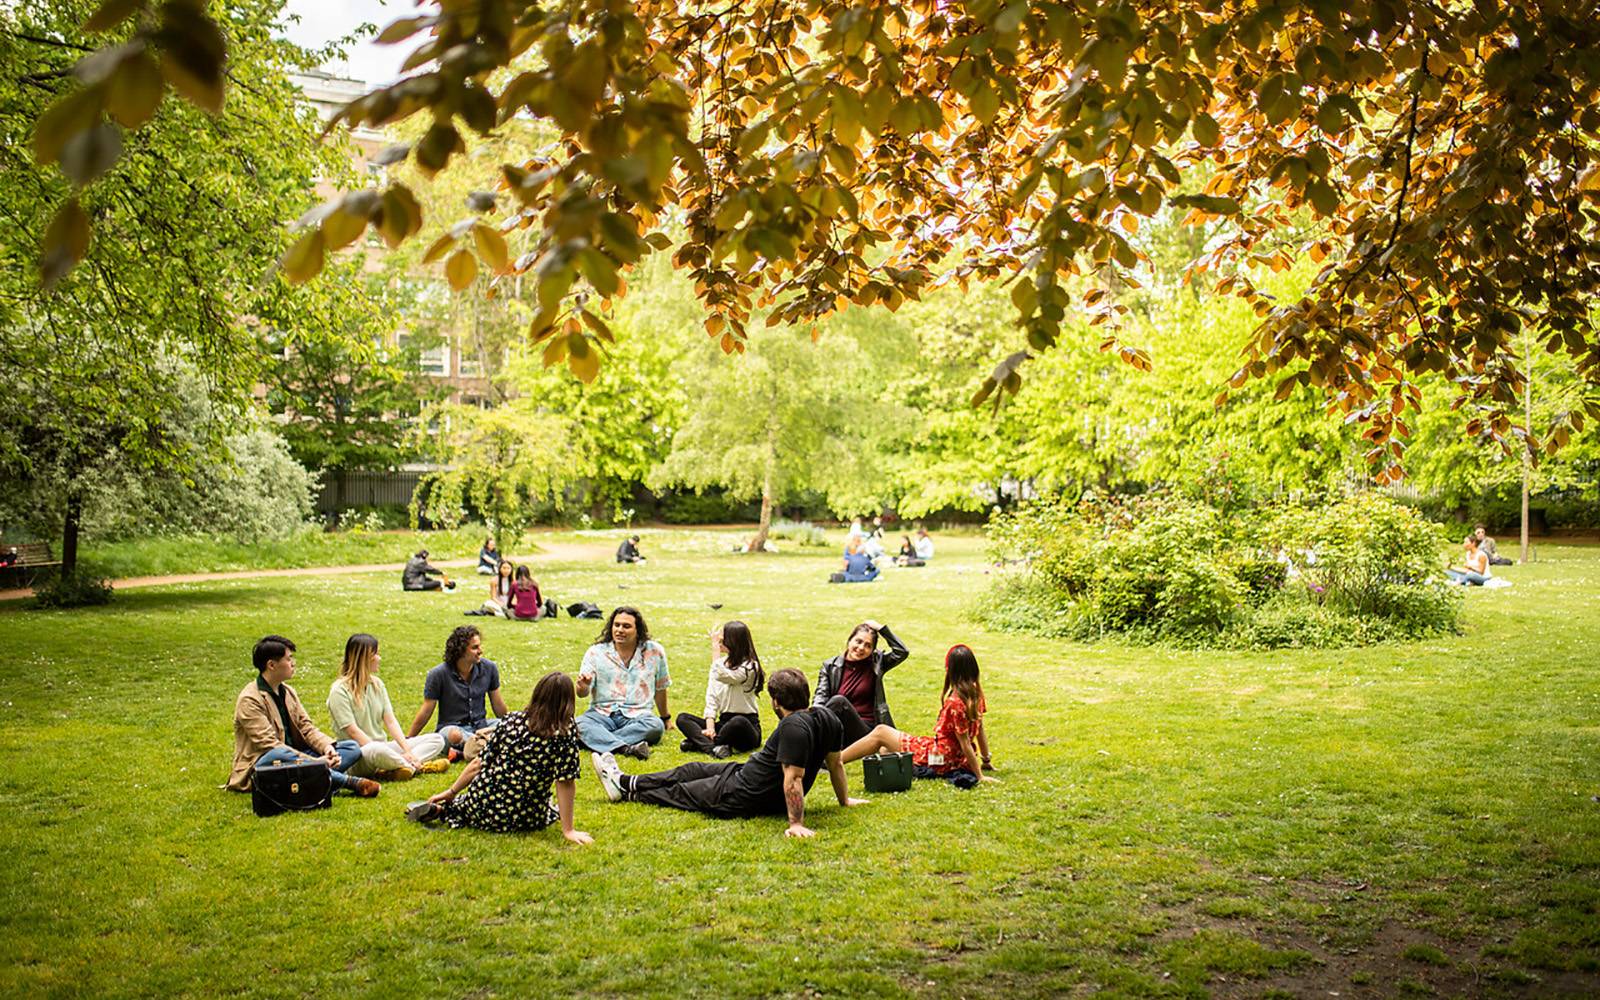 Students sitting in a circle in the middle of a park space